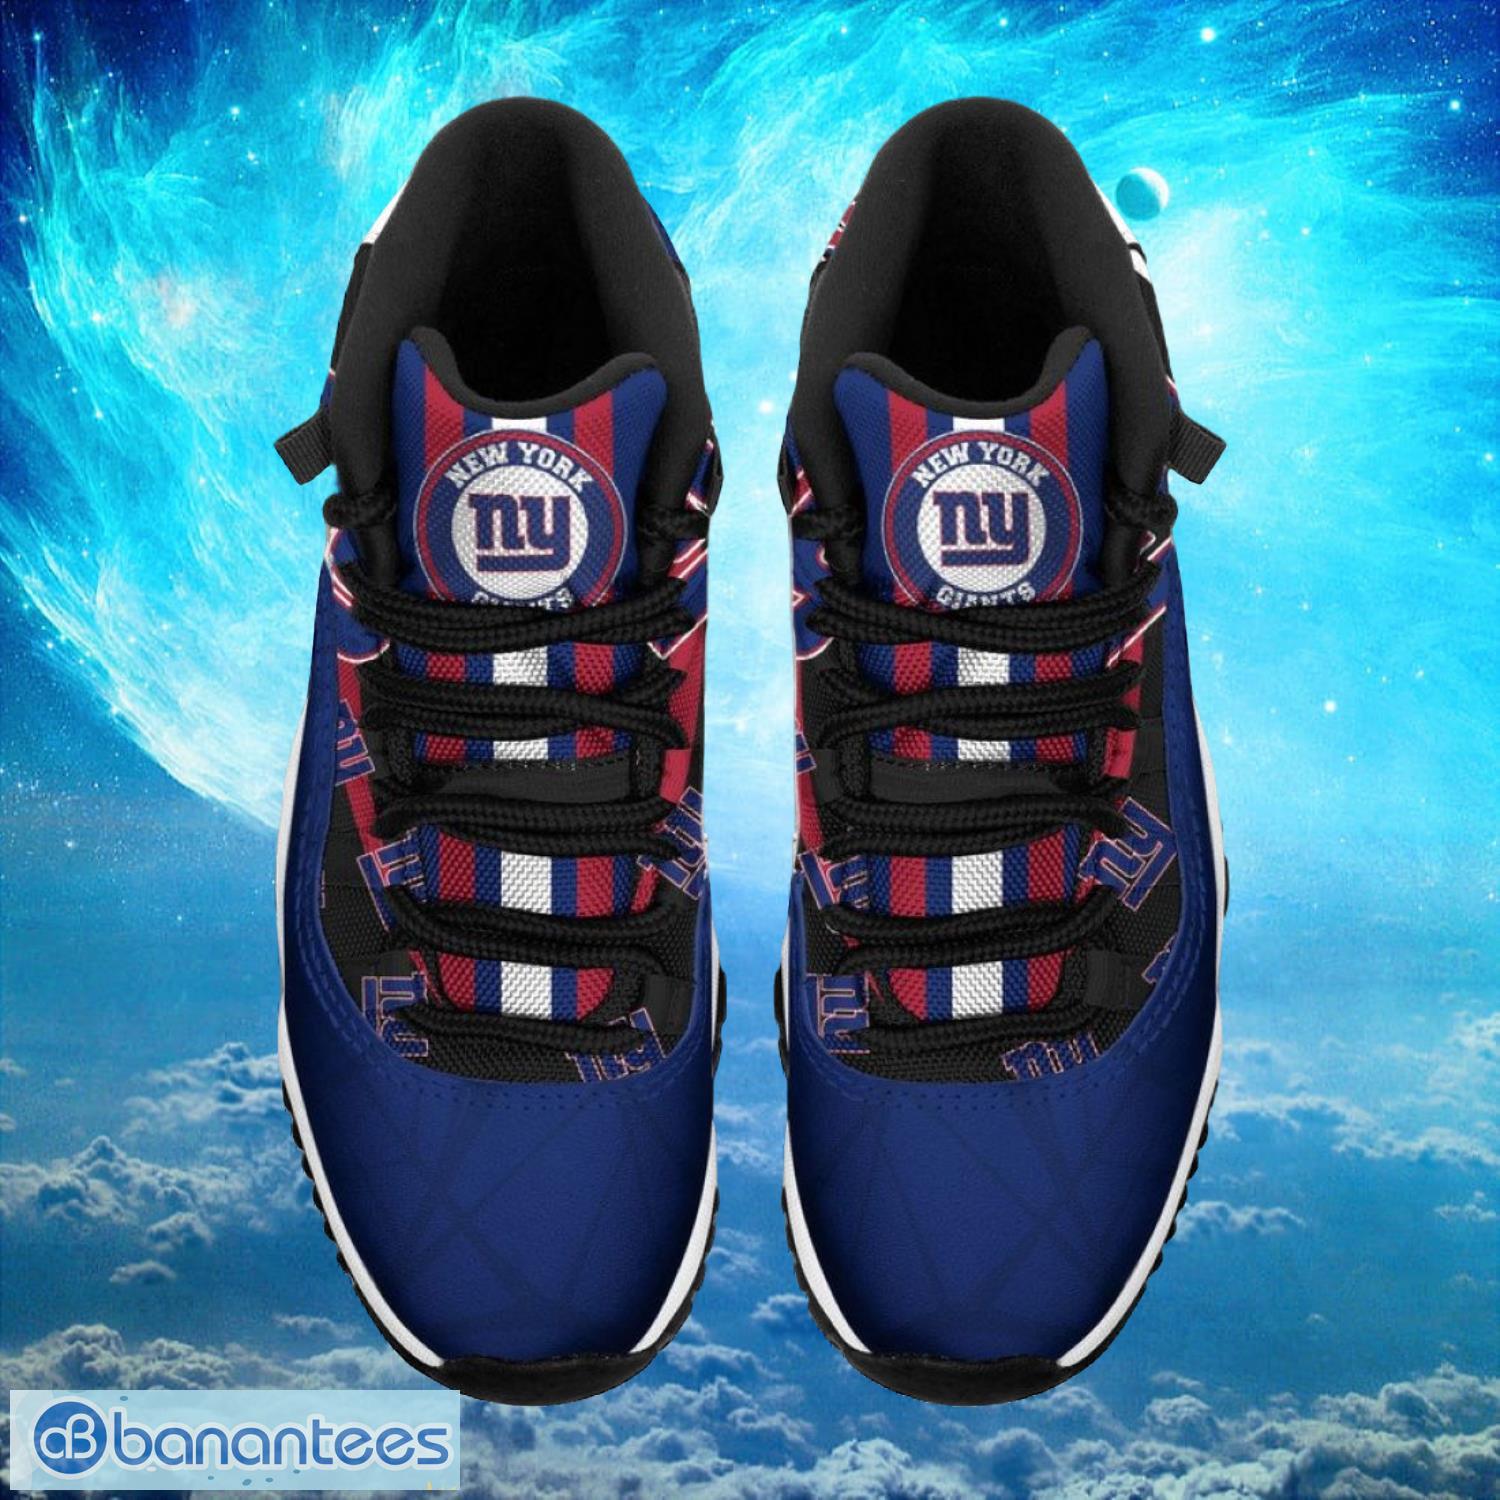 New York Giants NFL Air Jordan 11 Sneakers Shoes Gift For Fans Product Photo 2